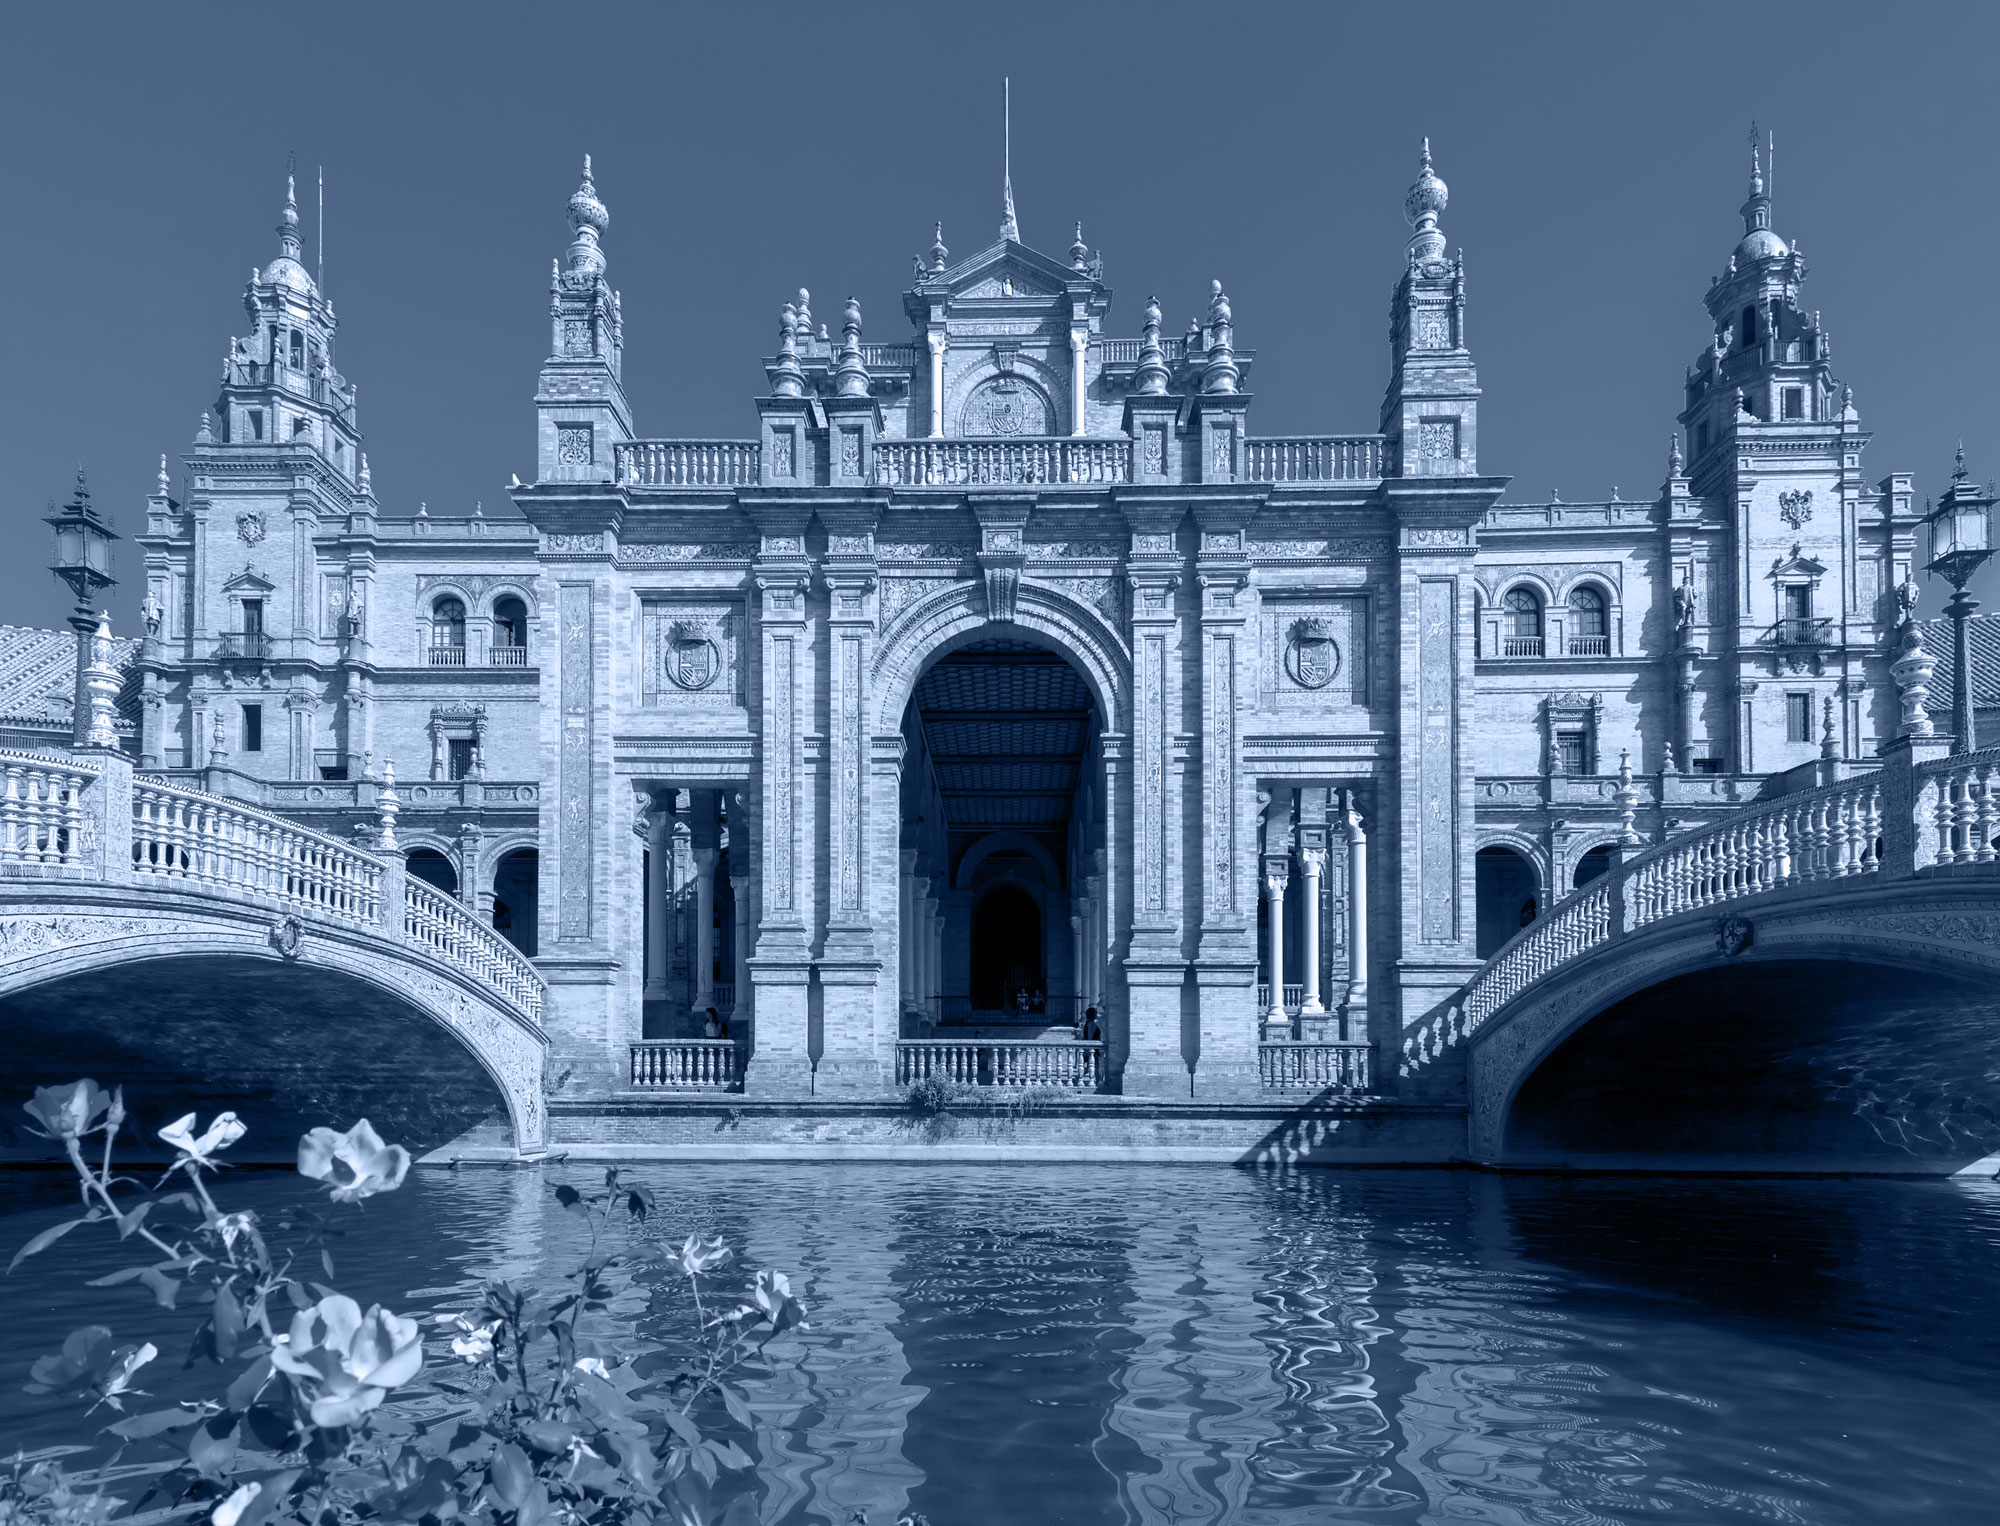 An ornate building with a bridge over a body of water in Seville, Spain.